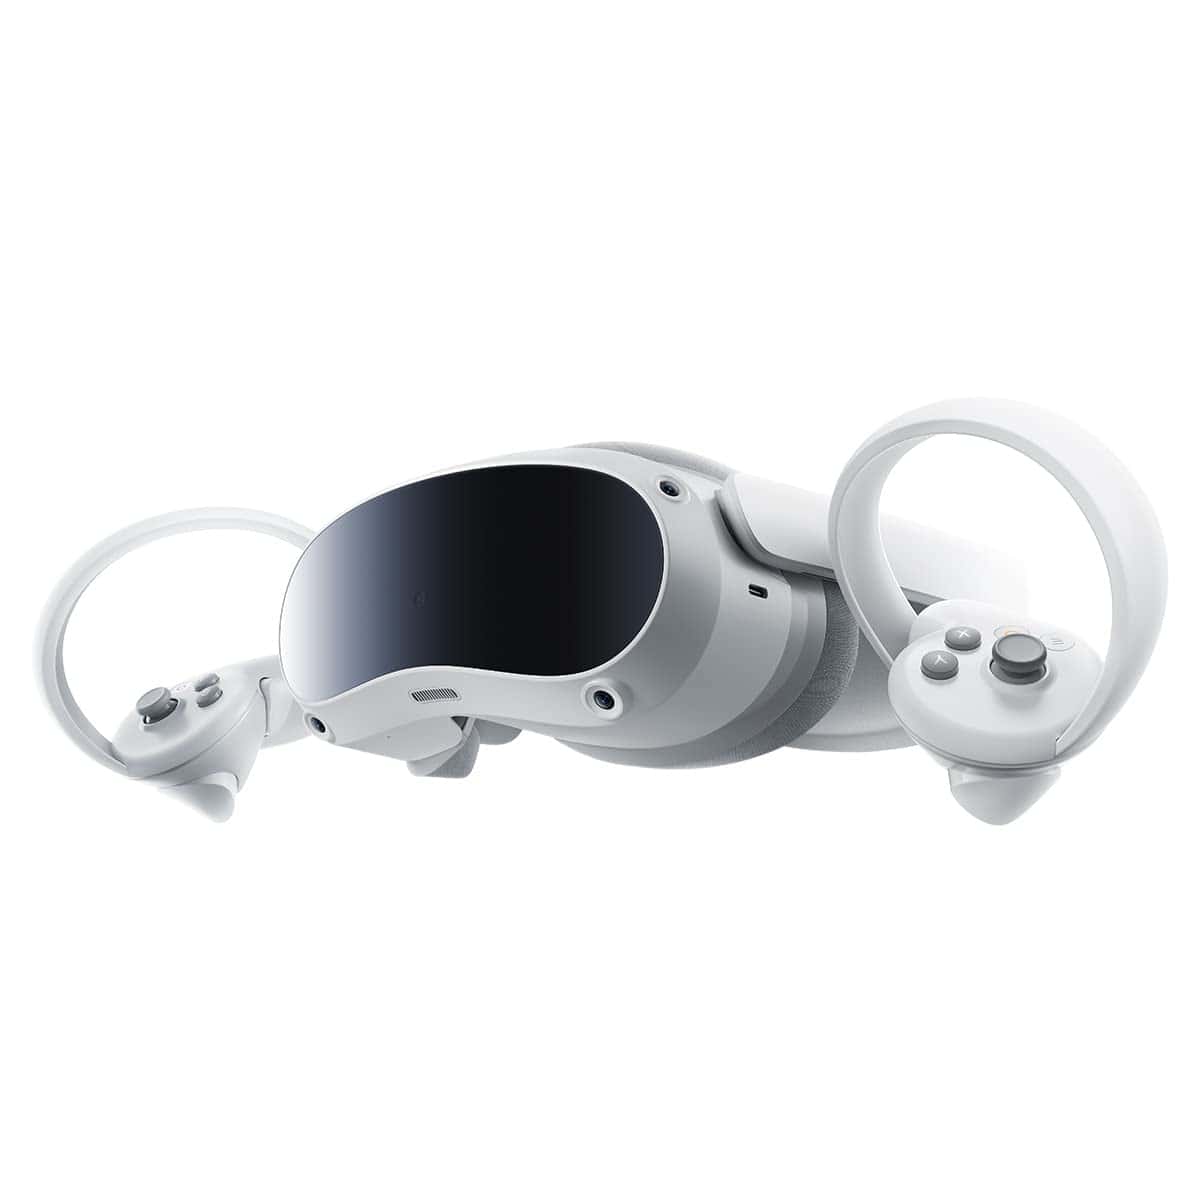 A Pico 4 vr headset on a white background.